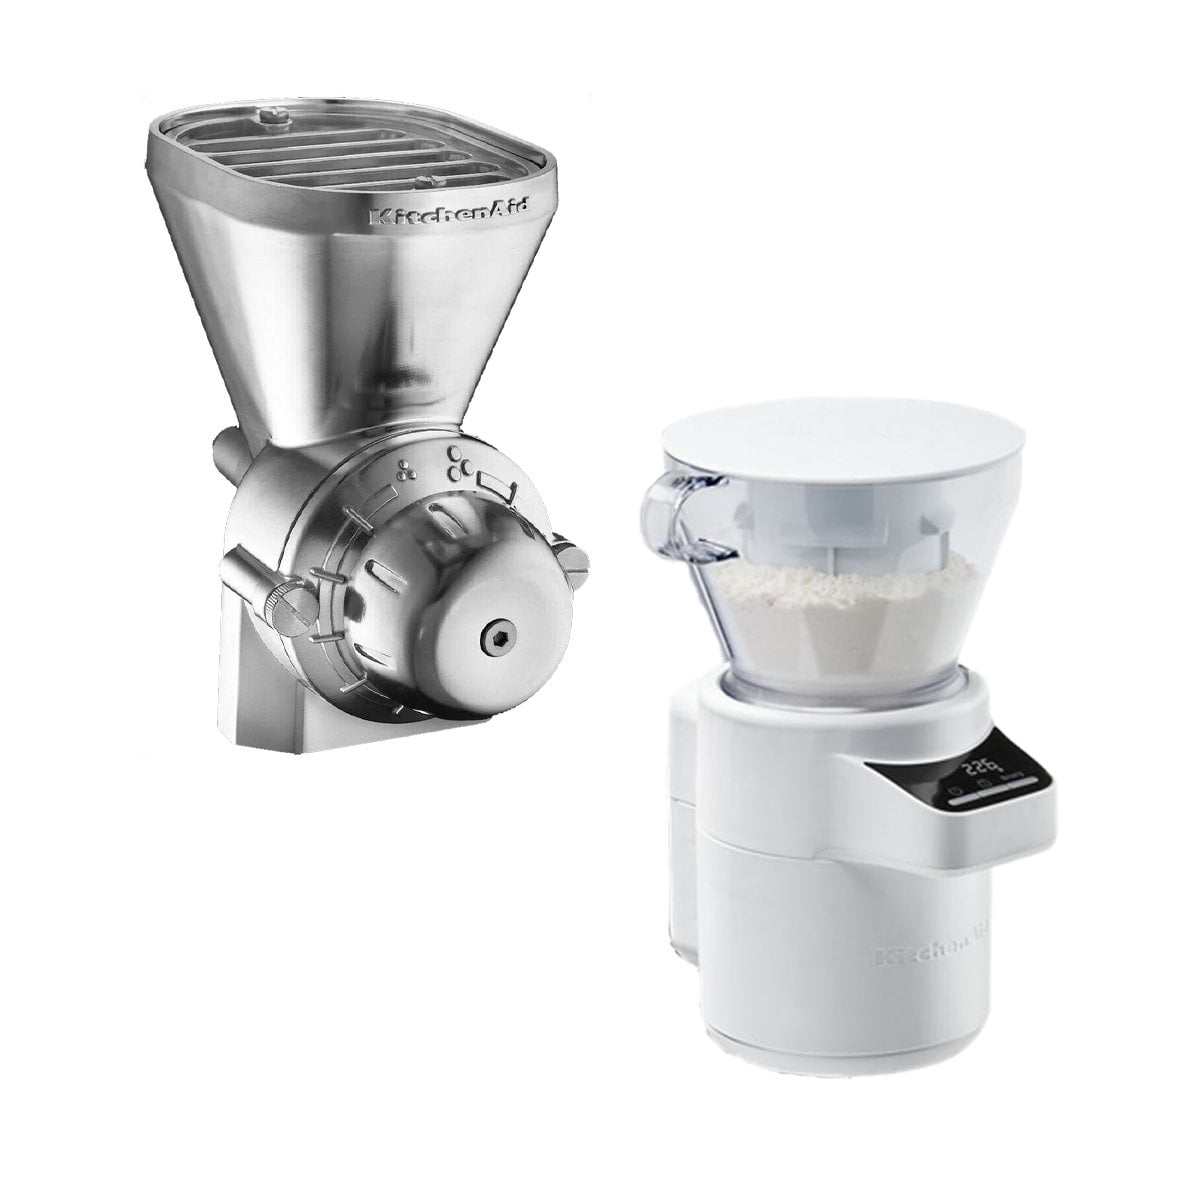 KitchenAid Stand Mixer Flour Sifter and Scale Attachment in White